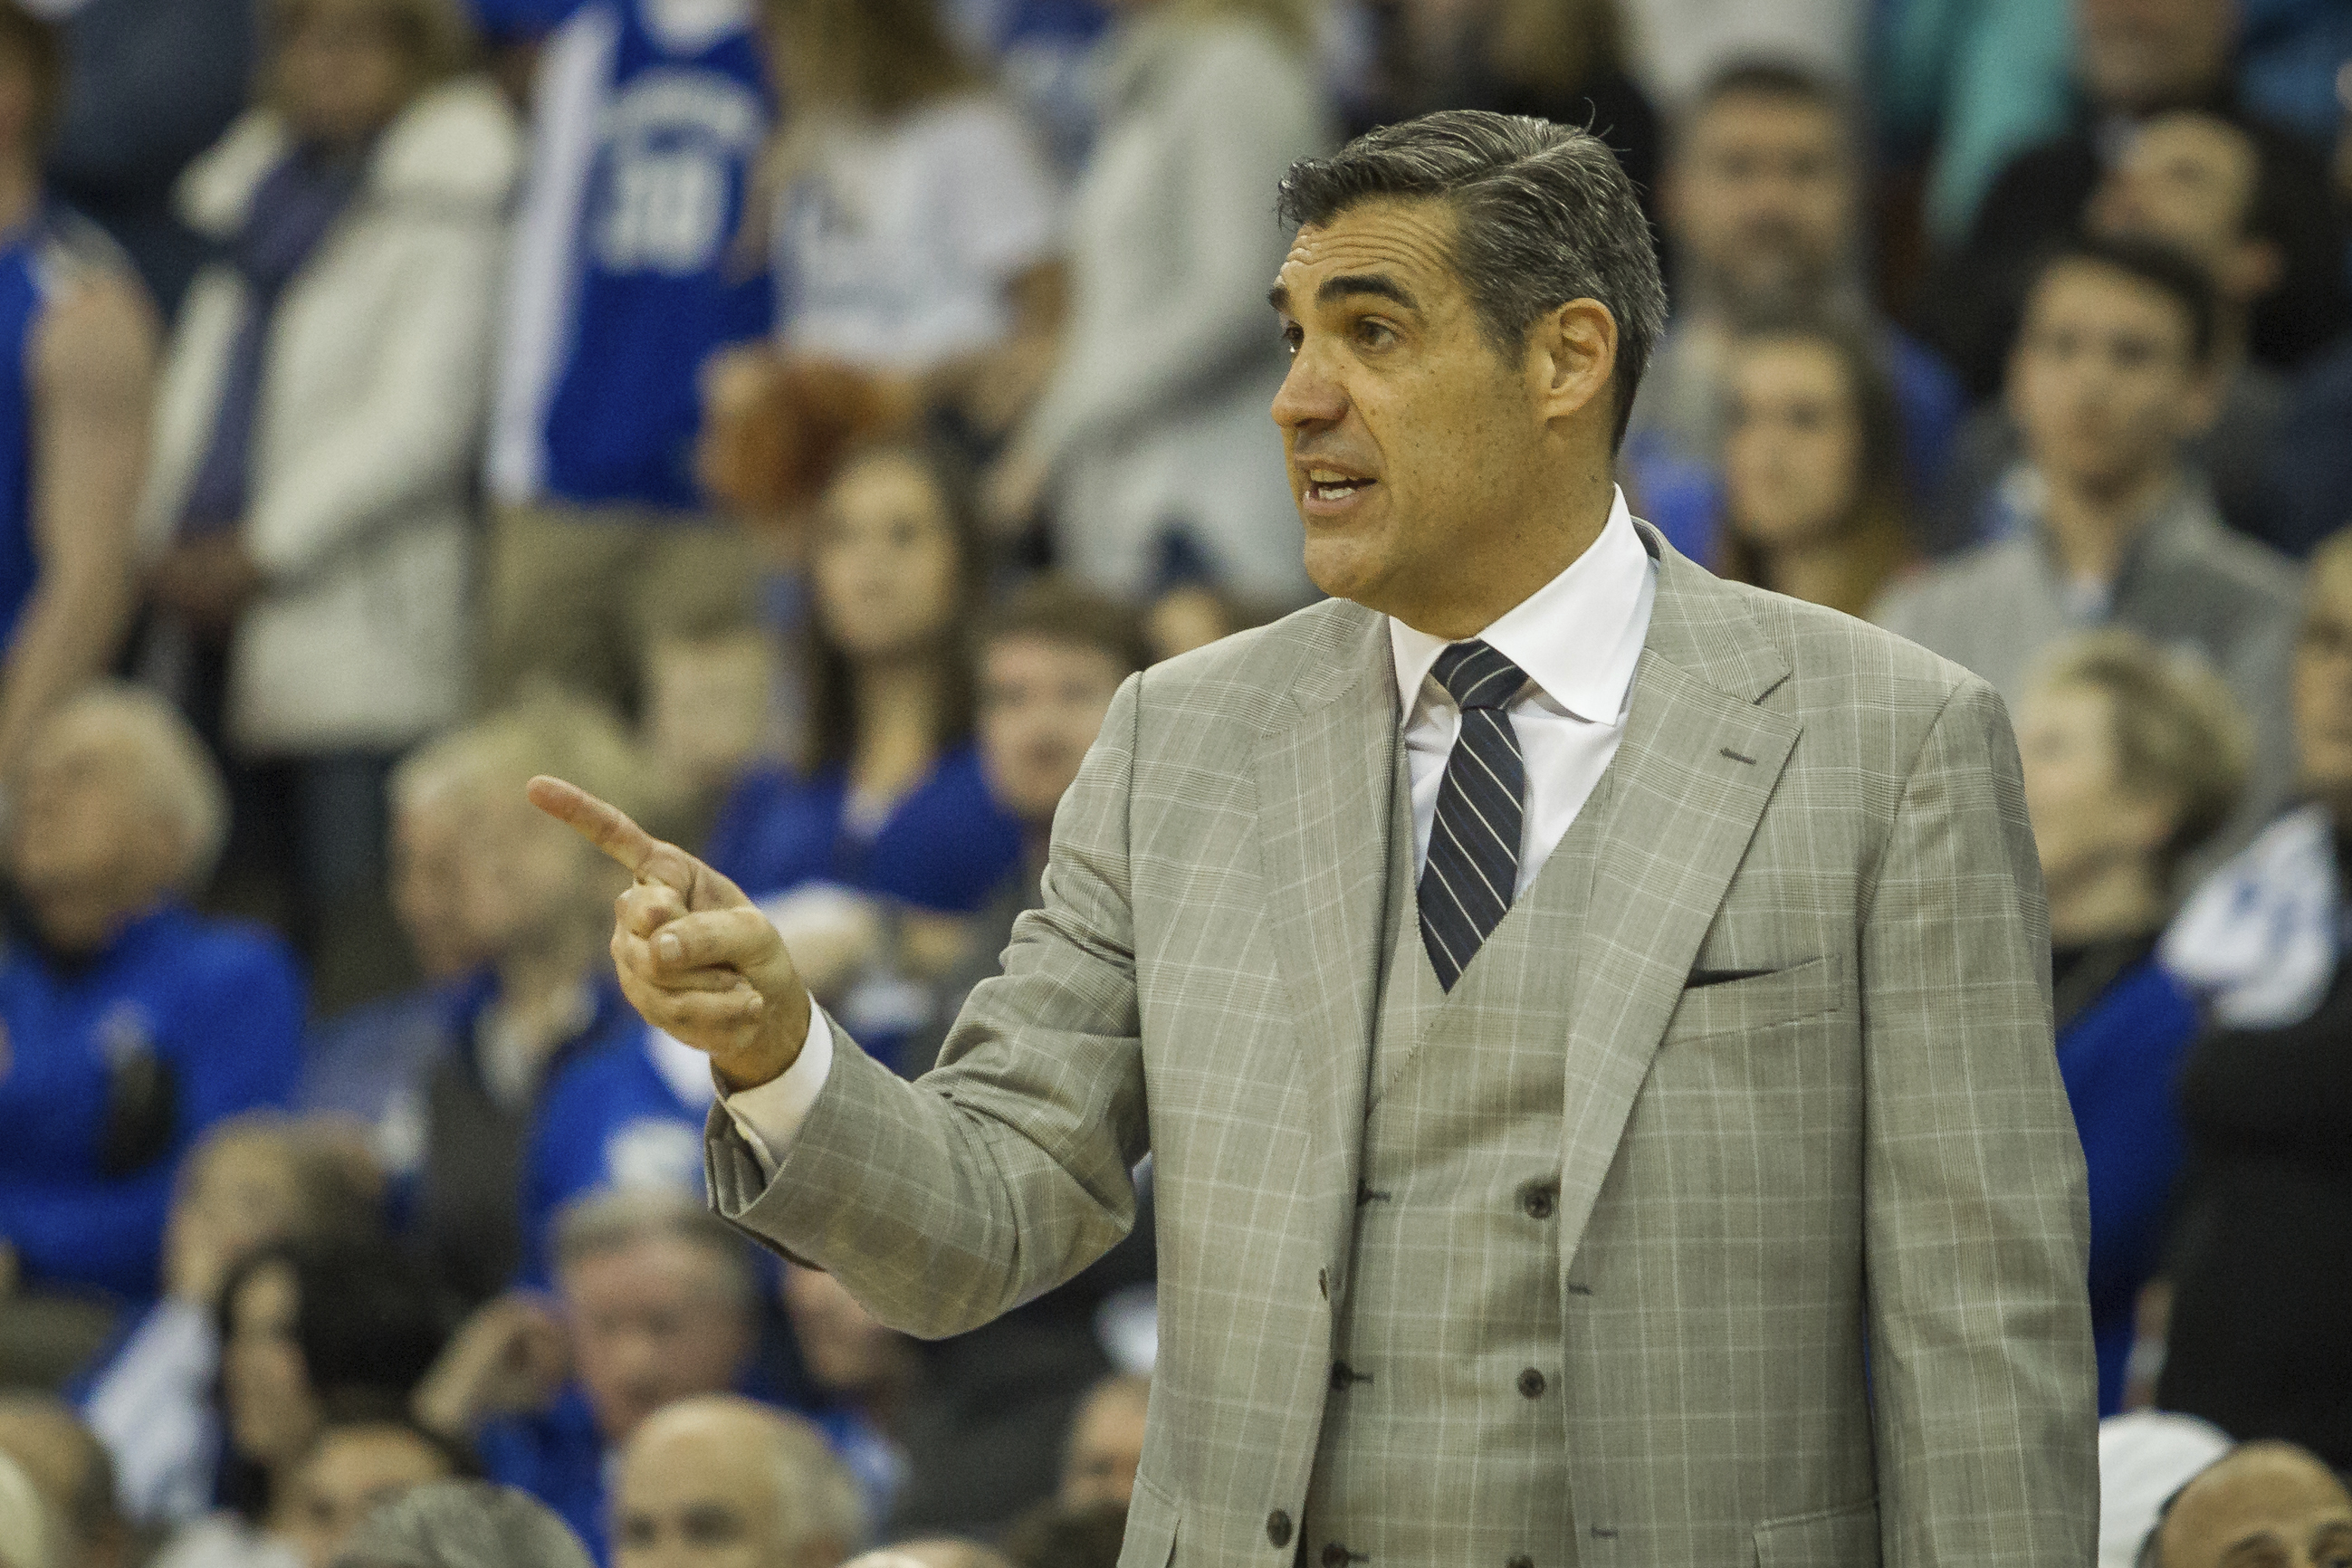 Villanova head coach Jay Wright gives instructions to his players during the second half of an NCAA college basketball game against Creighton in Omaha, Neb., Saturday, Dec. 31, 2016. Villanova defeated Creighton 80-70. (AP Photo/John Peterson)